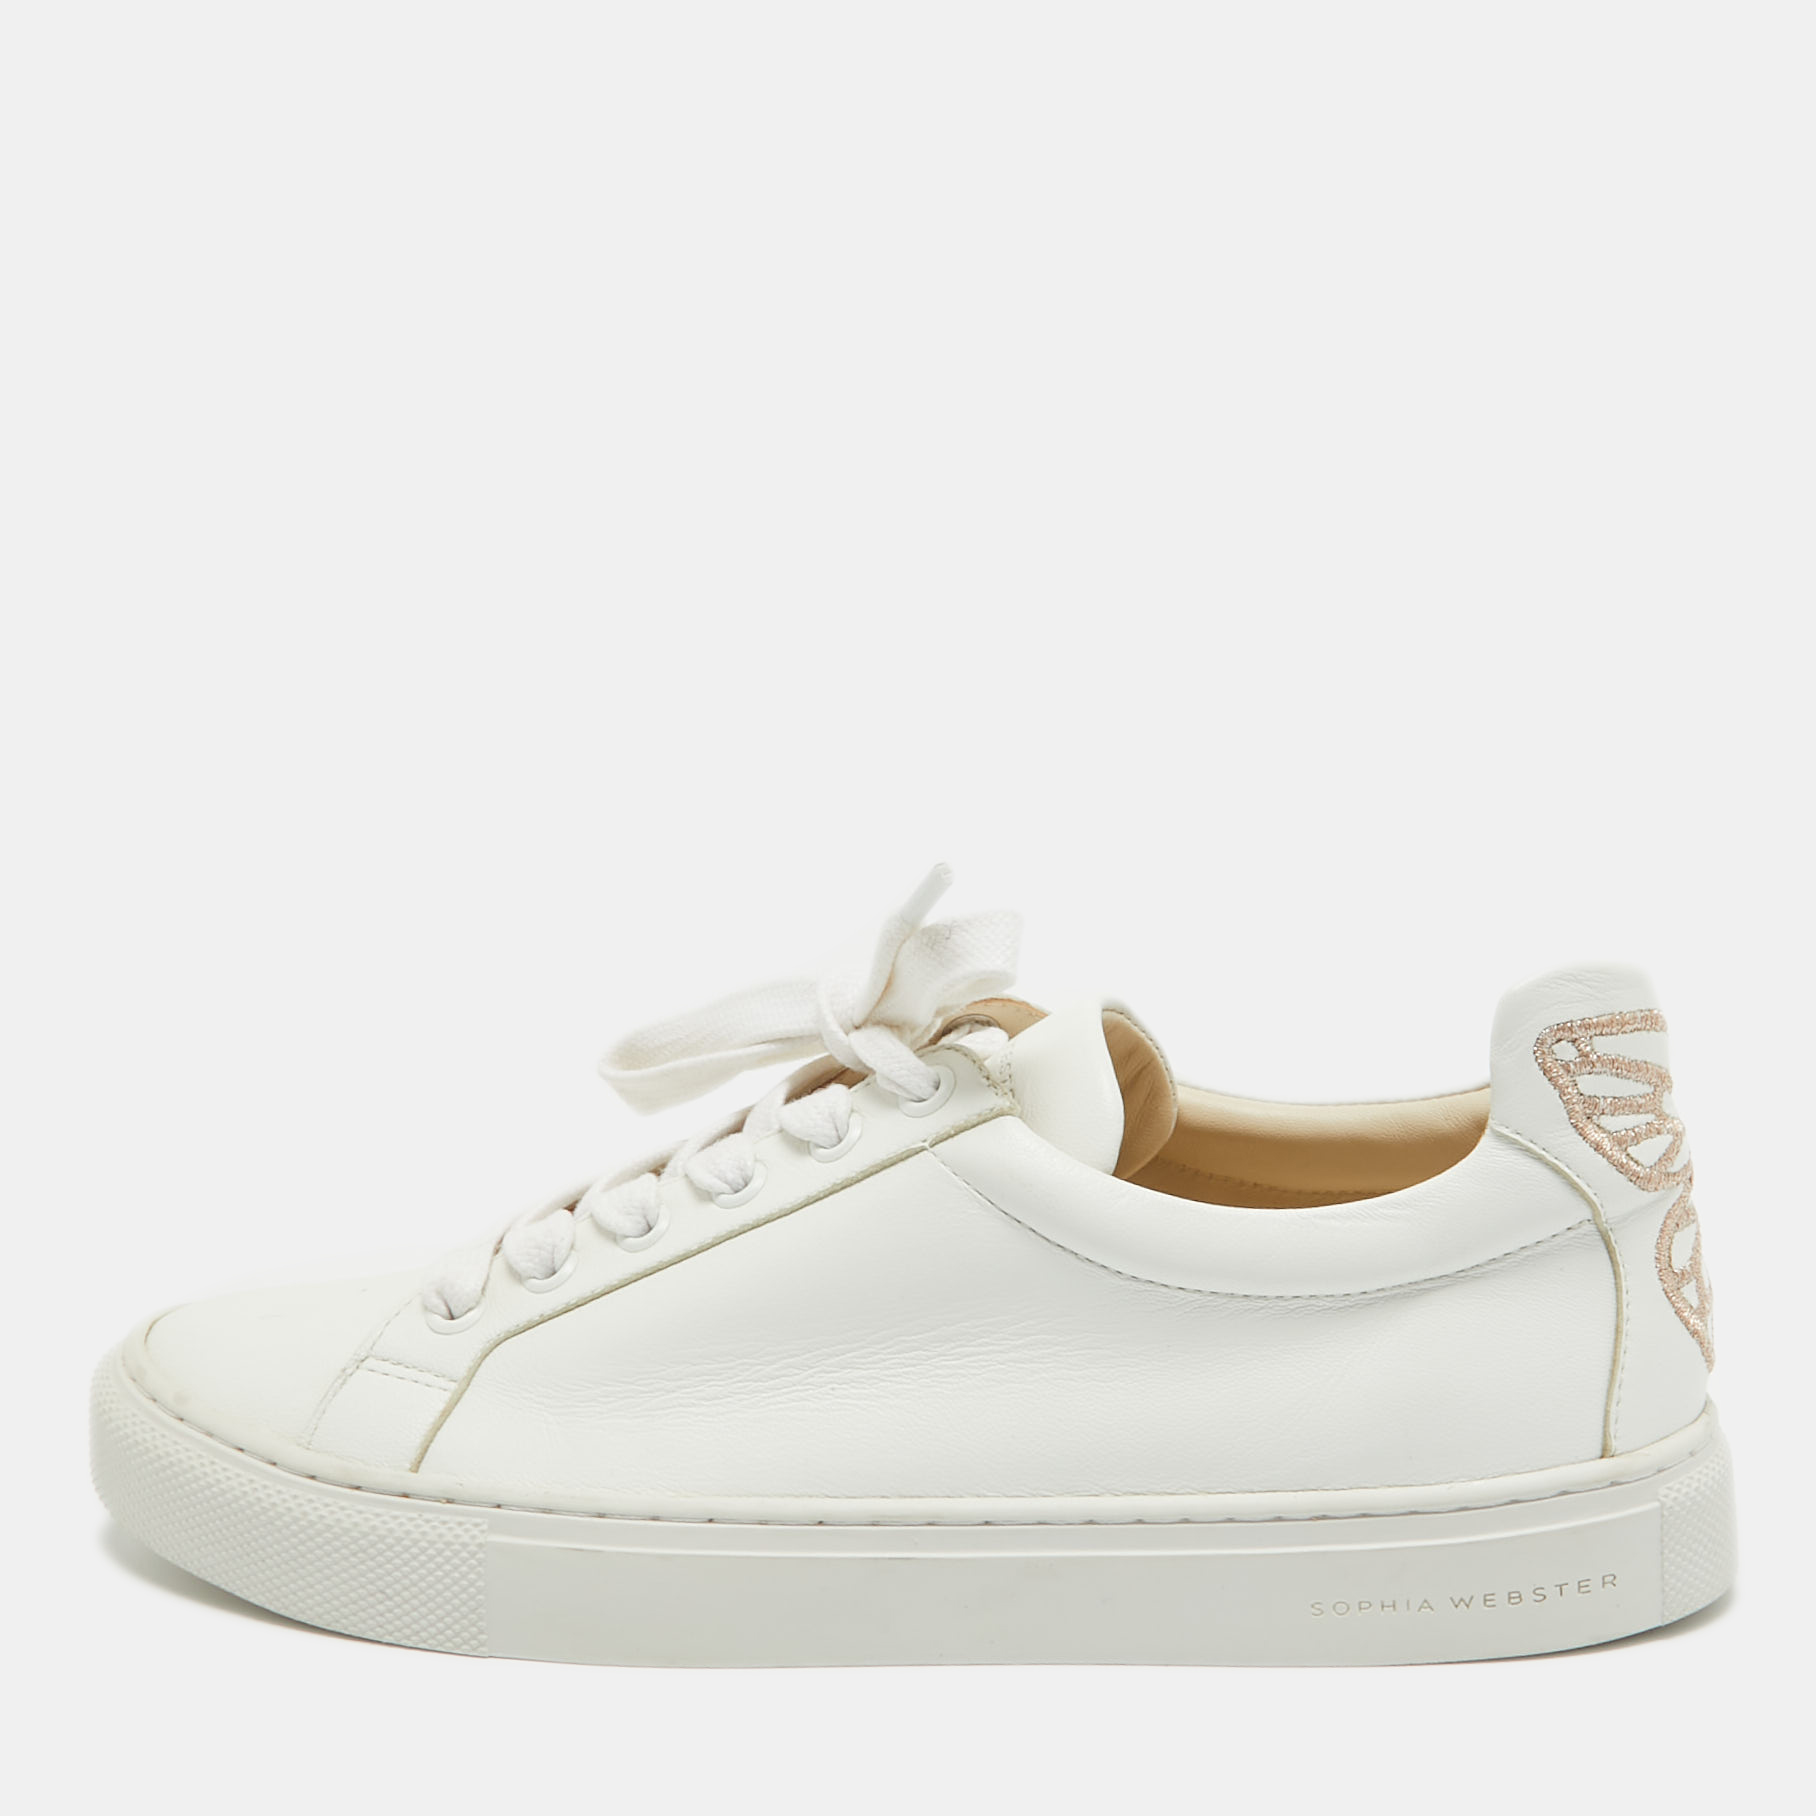 

Sophia Webster White Leather Butterfly Low Top Sneakers Size